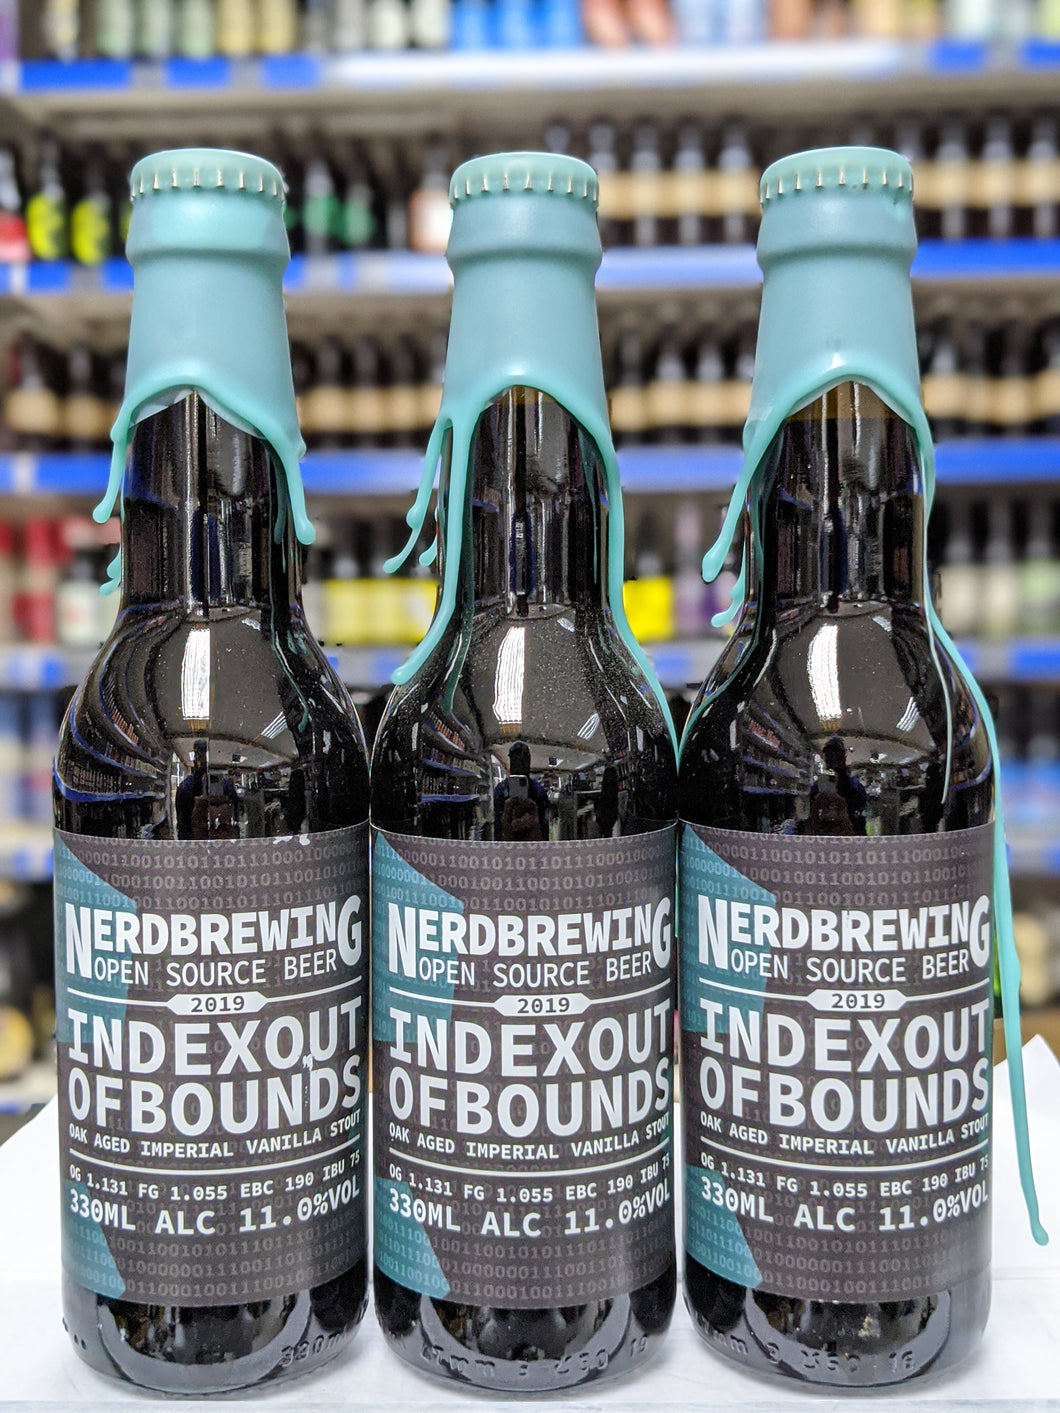 Indexout Of Bounds 2019 - Nerd Brewing - Oak Aged Imperial Vanilla Stout, 11%, 330ml Bottle